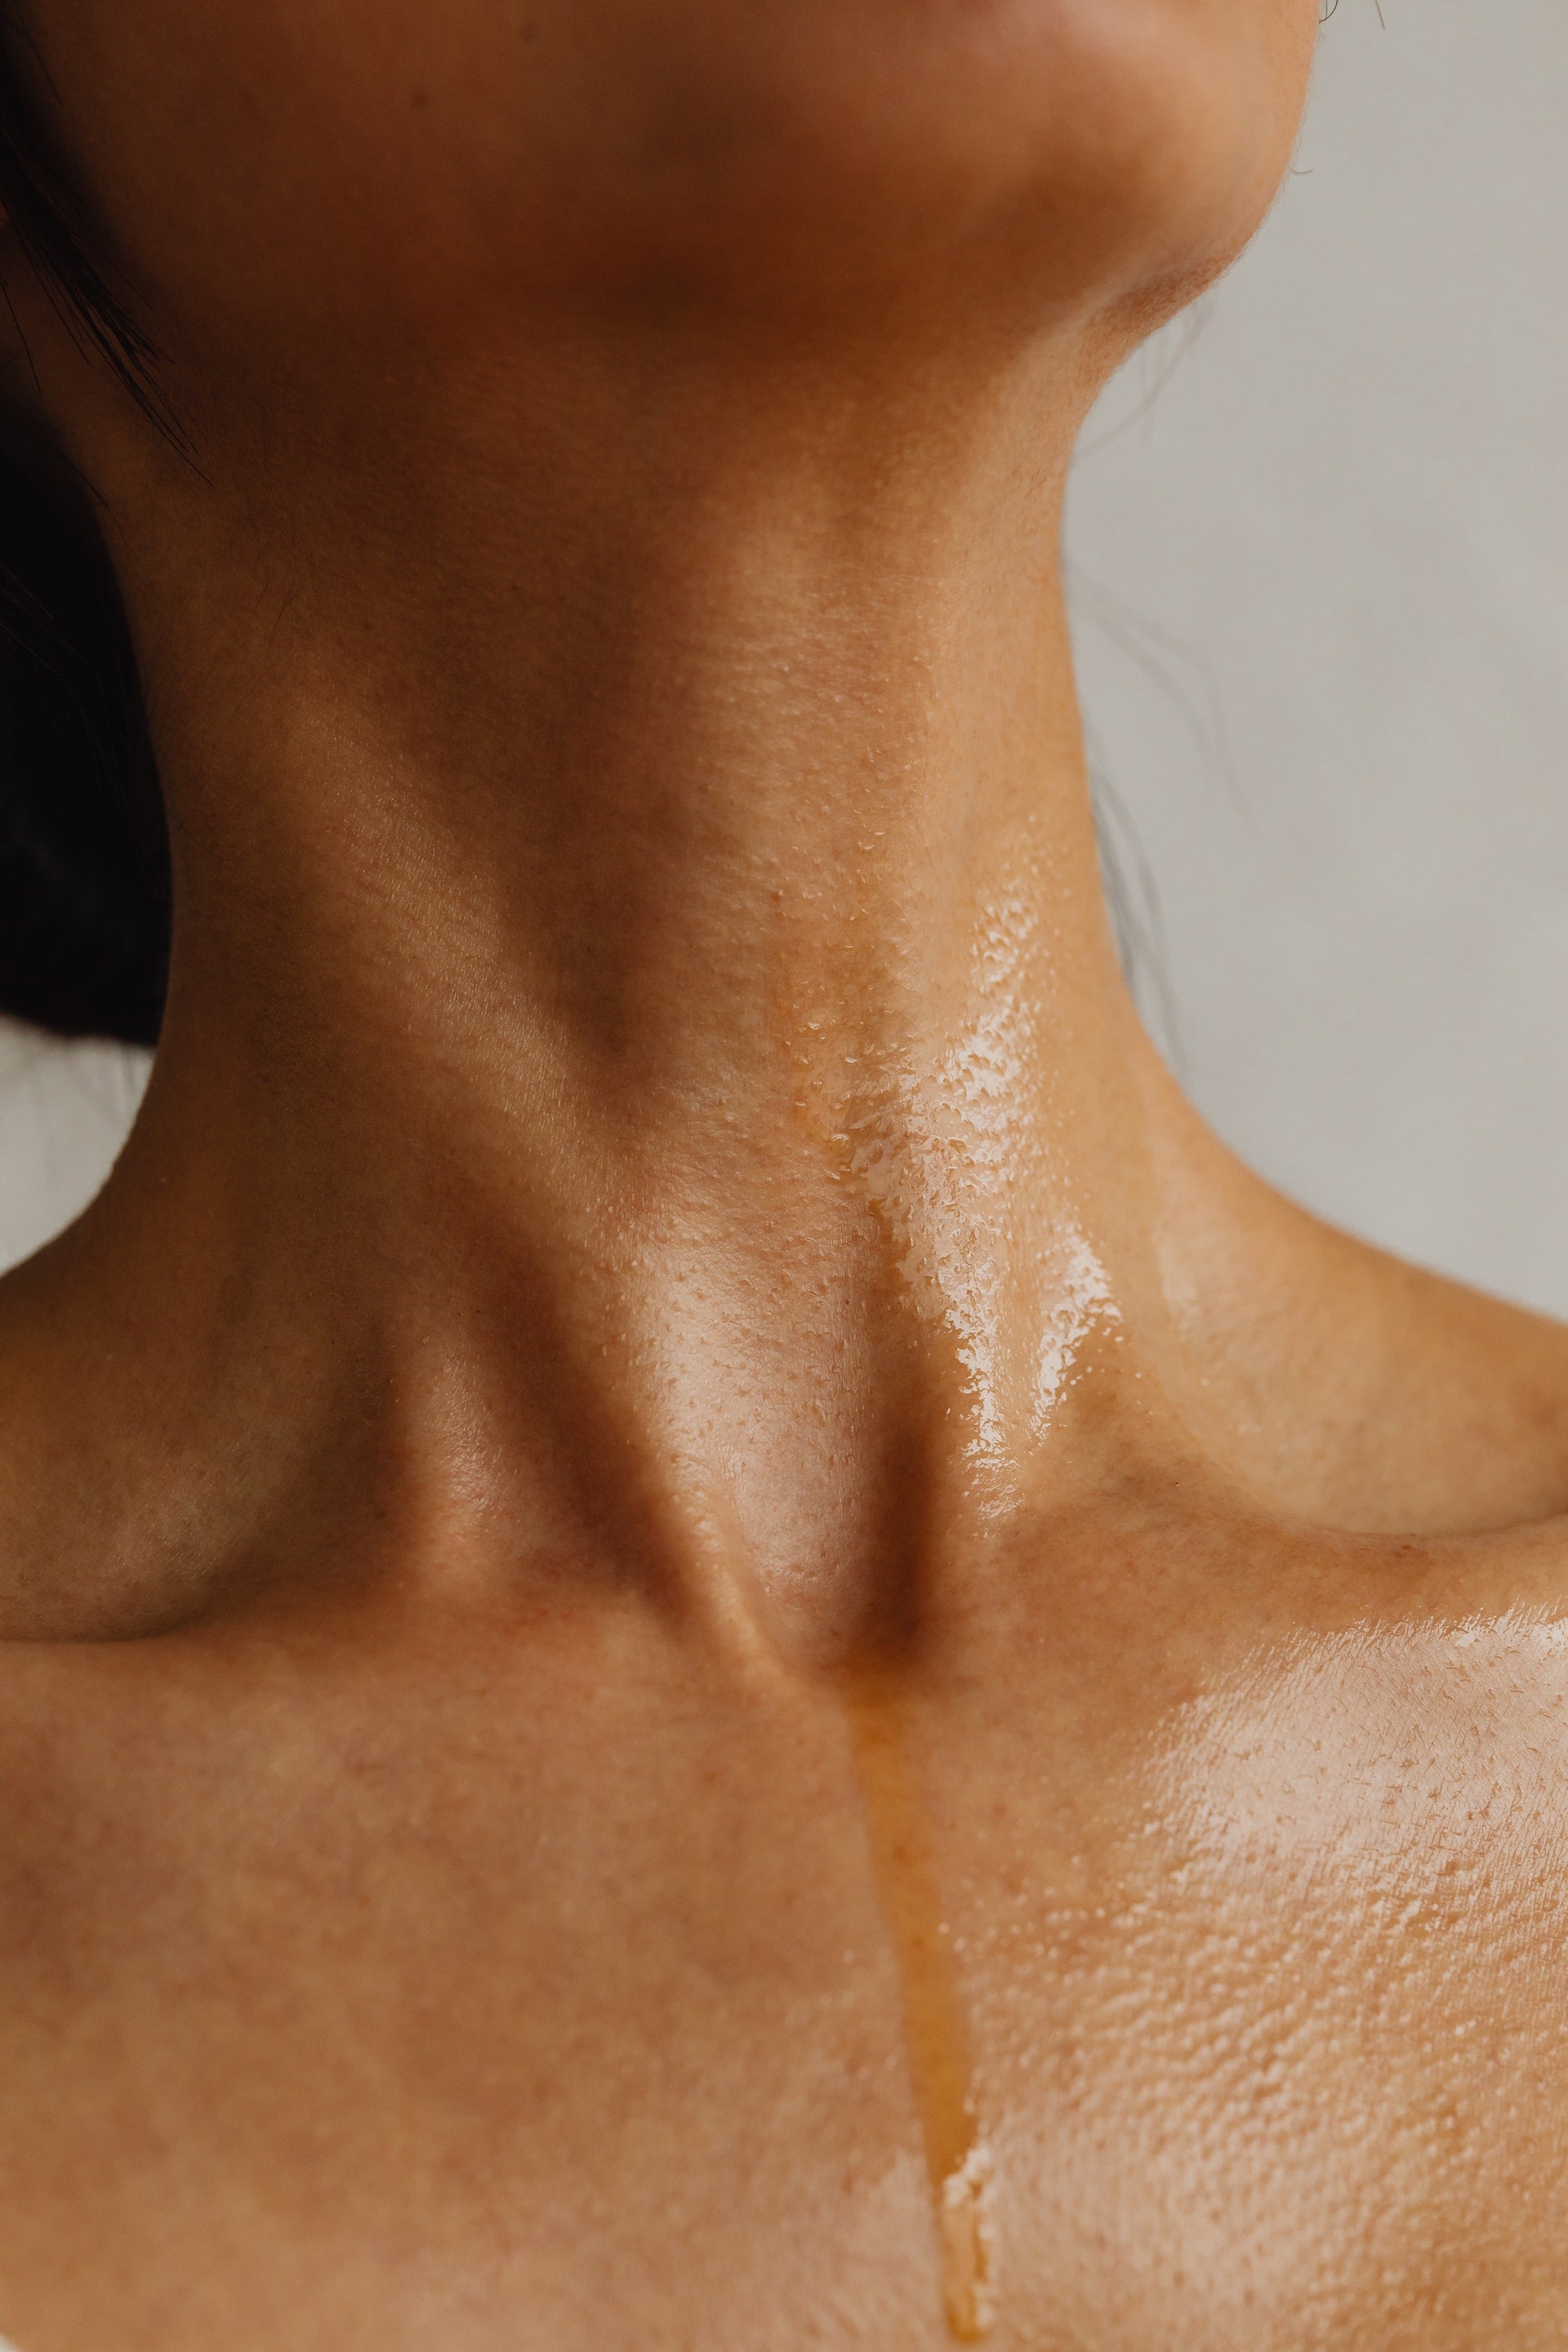 Woman's neck water or body oil